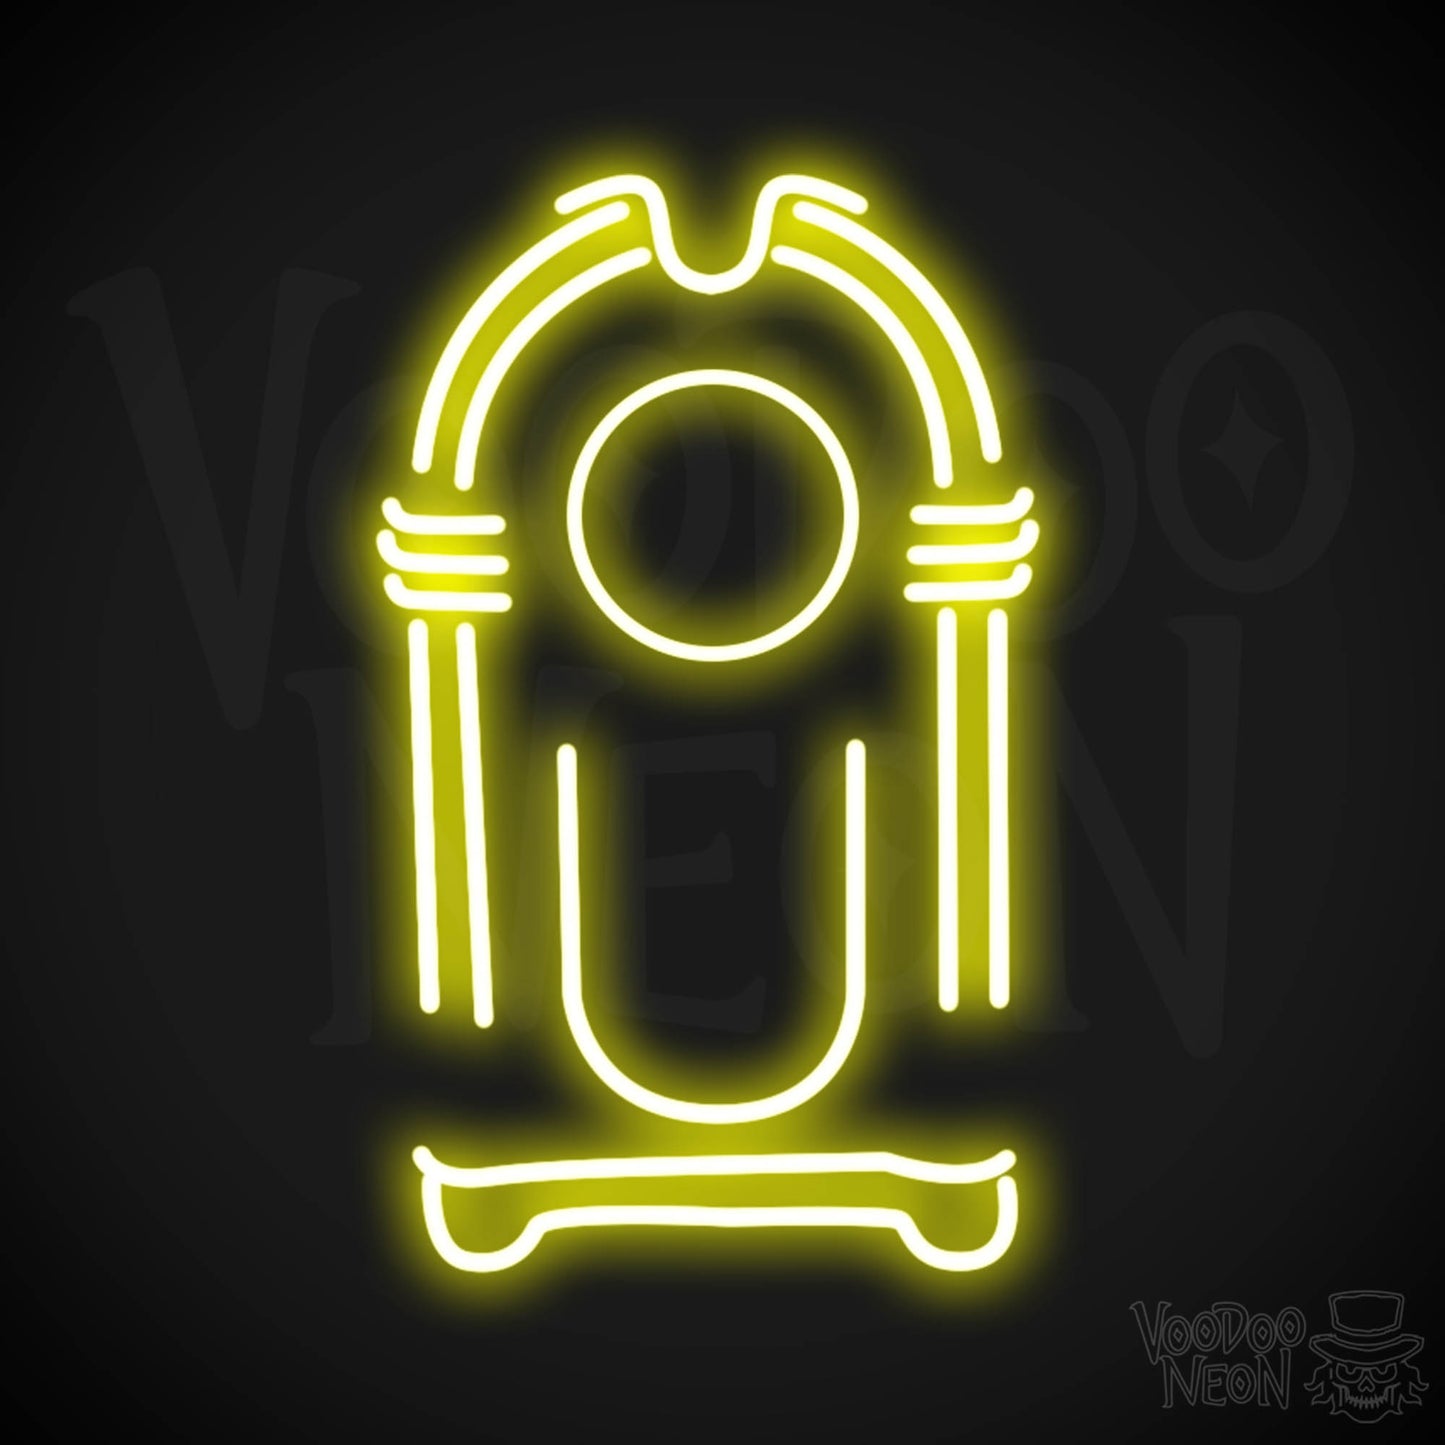 Jukebox Neon Sign - Neon Jukebox Sign - Wall Art - LED Lights - Color Yellow